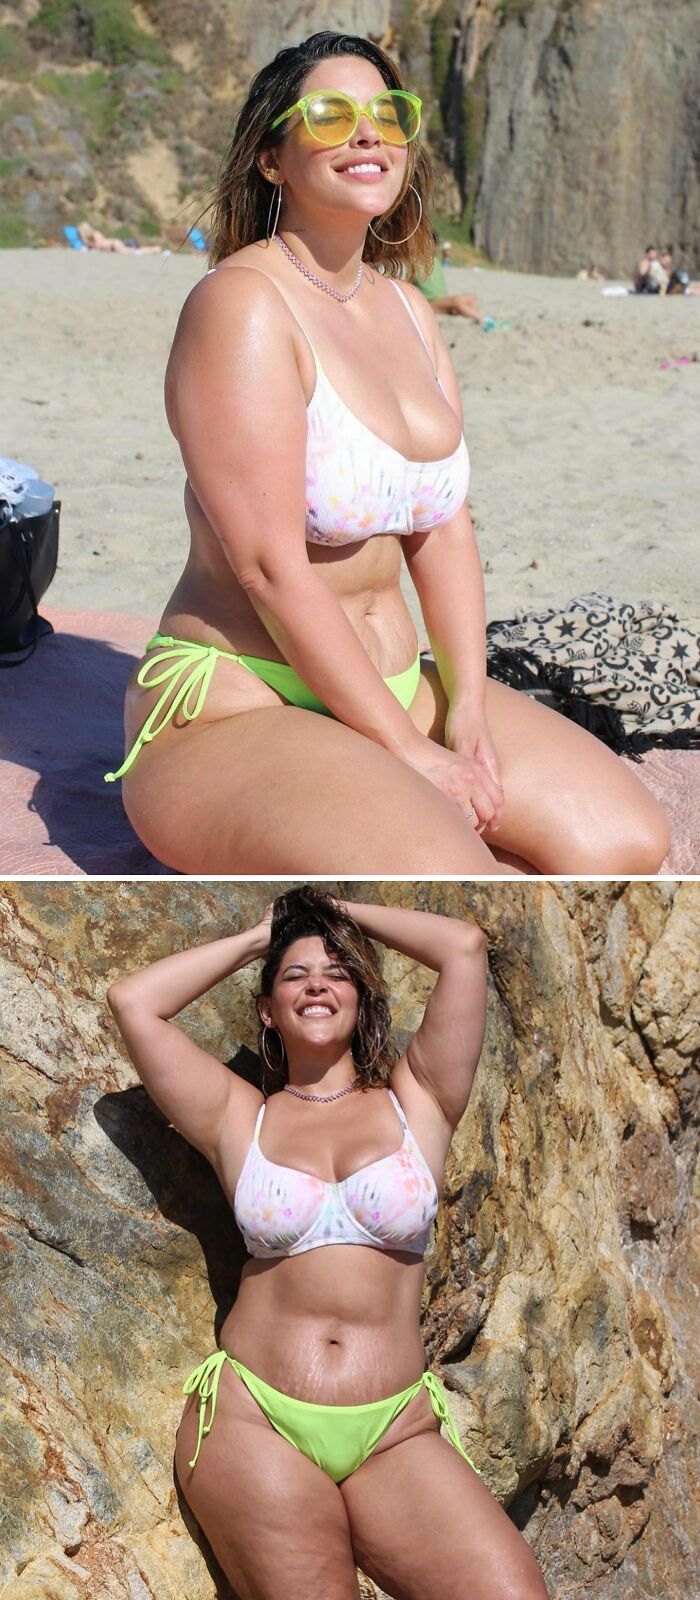 When Model Denise Bidot Gave Us This 2022 Motto "Stretch Marks, Cellulite, Rolls, Who Cares?"